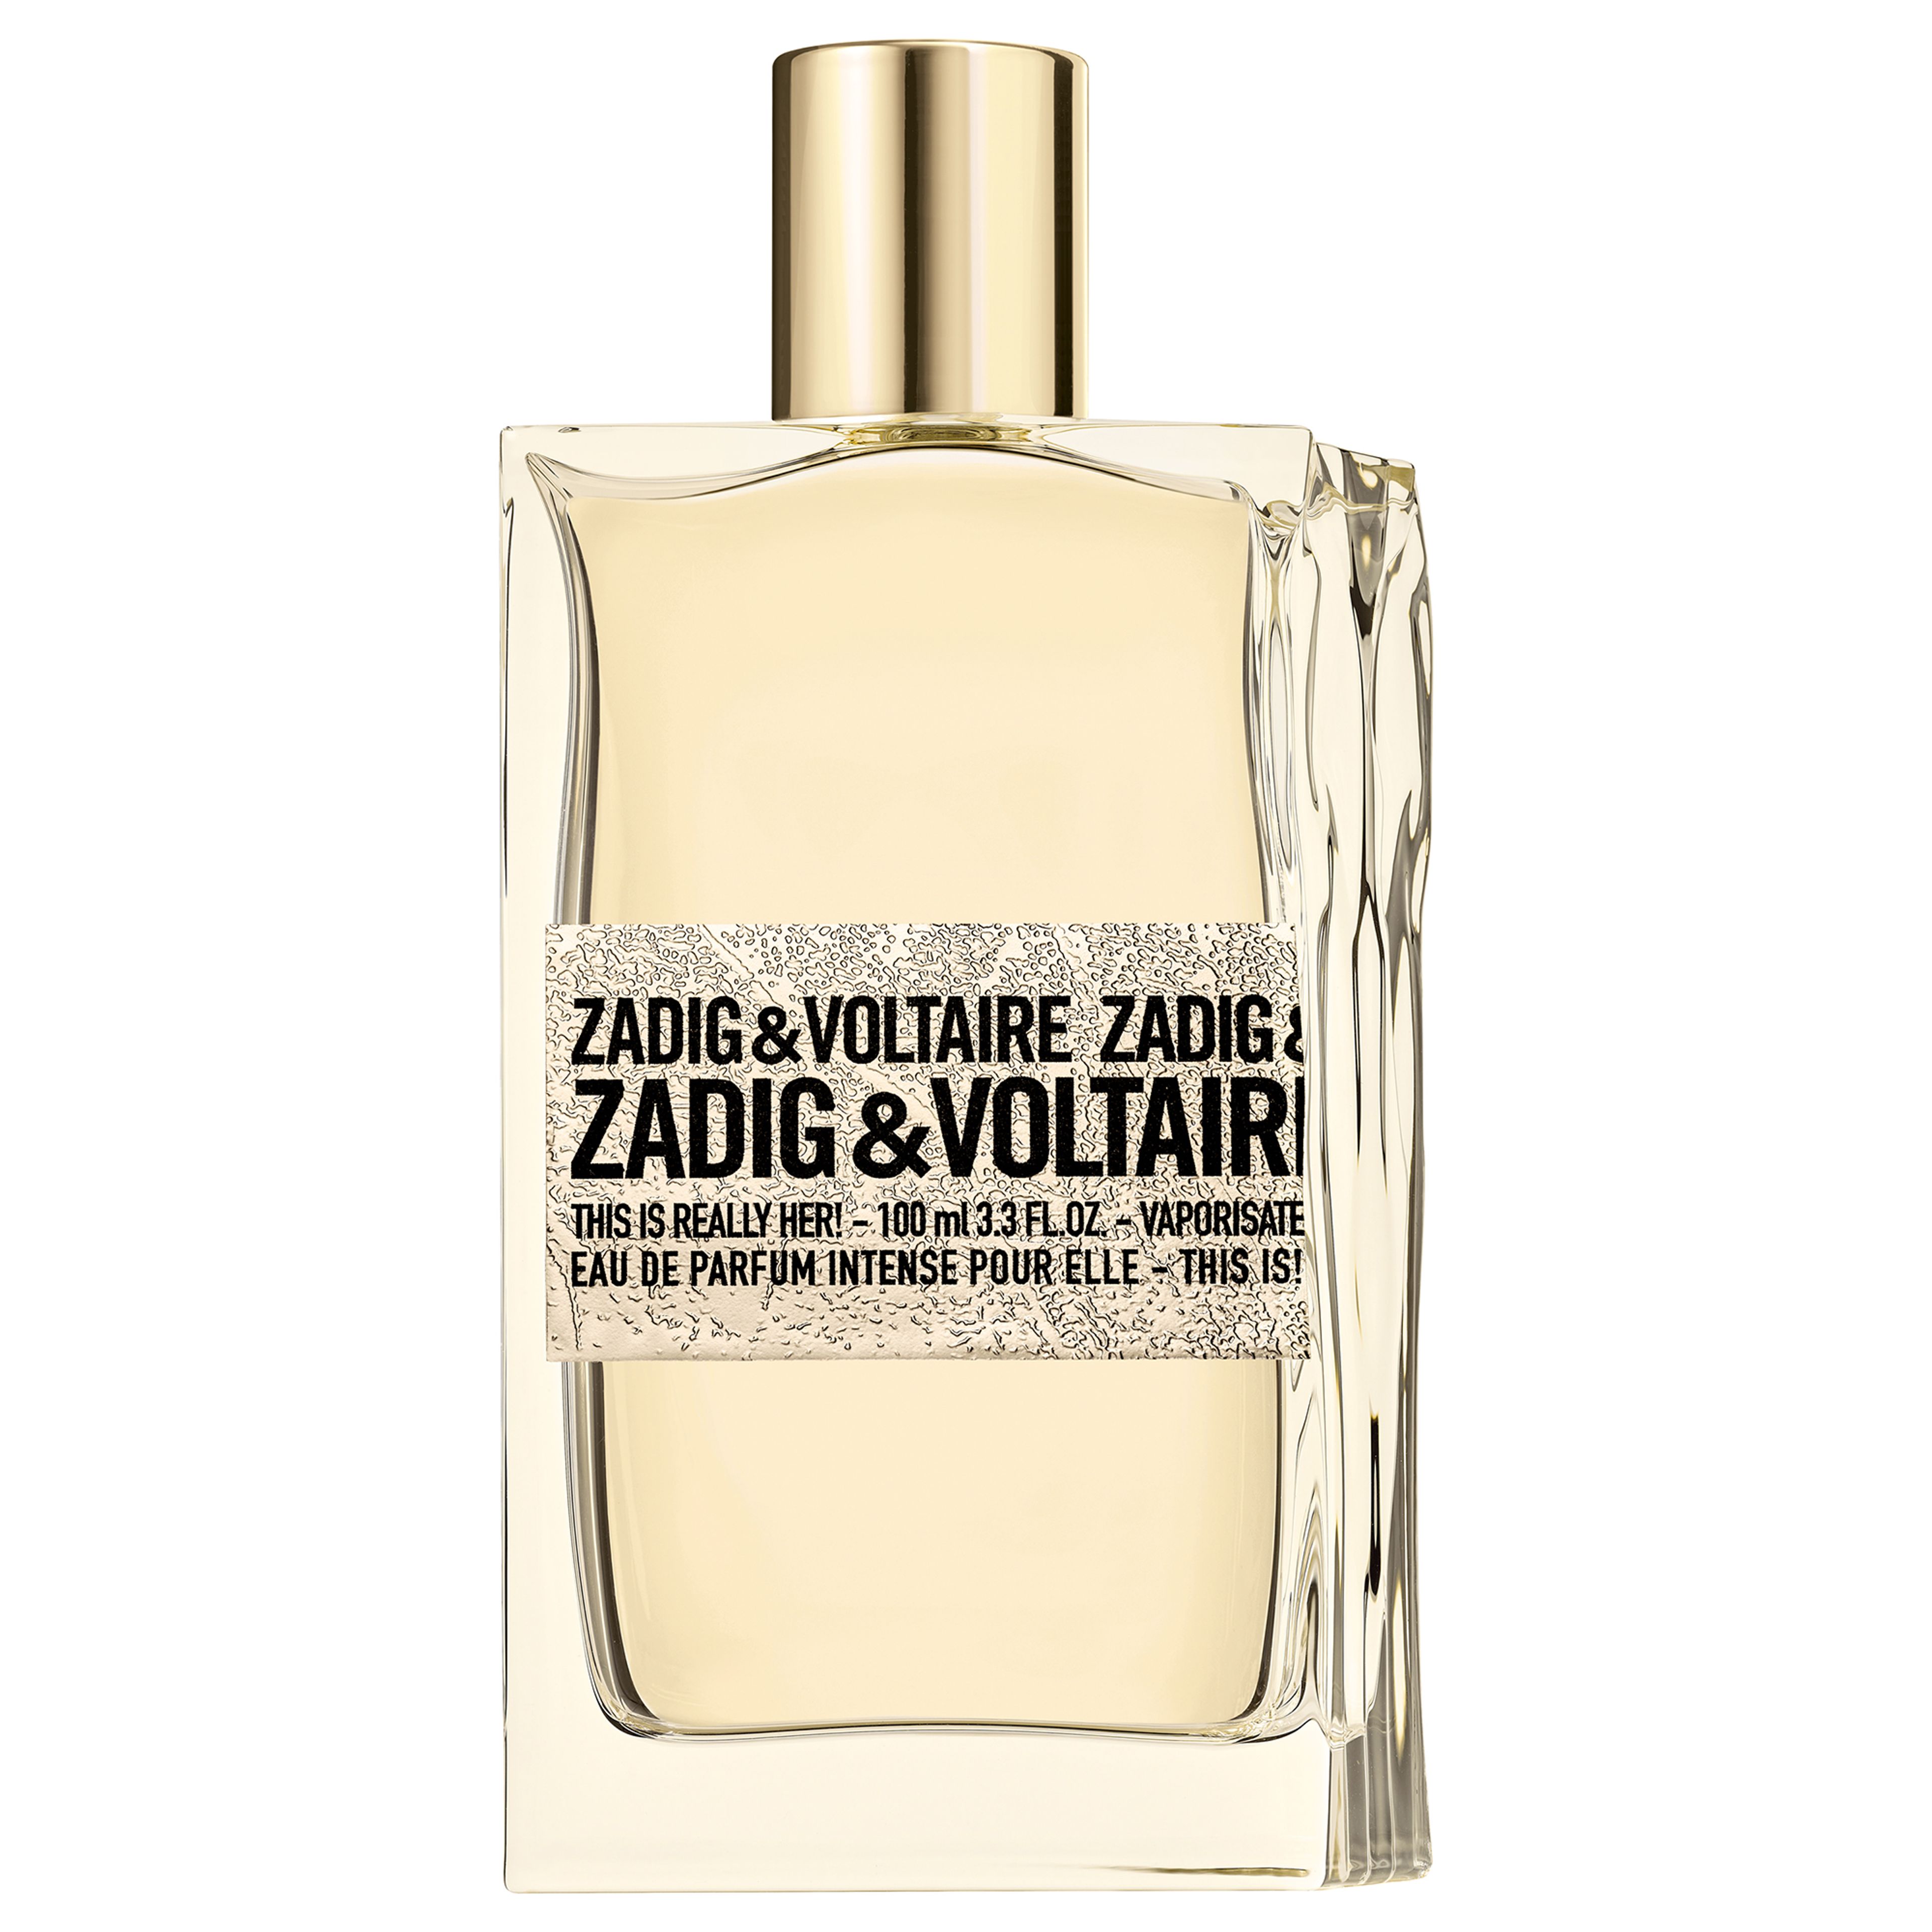 Zadig & Voltaire This Is Really Her! 1